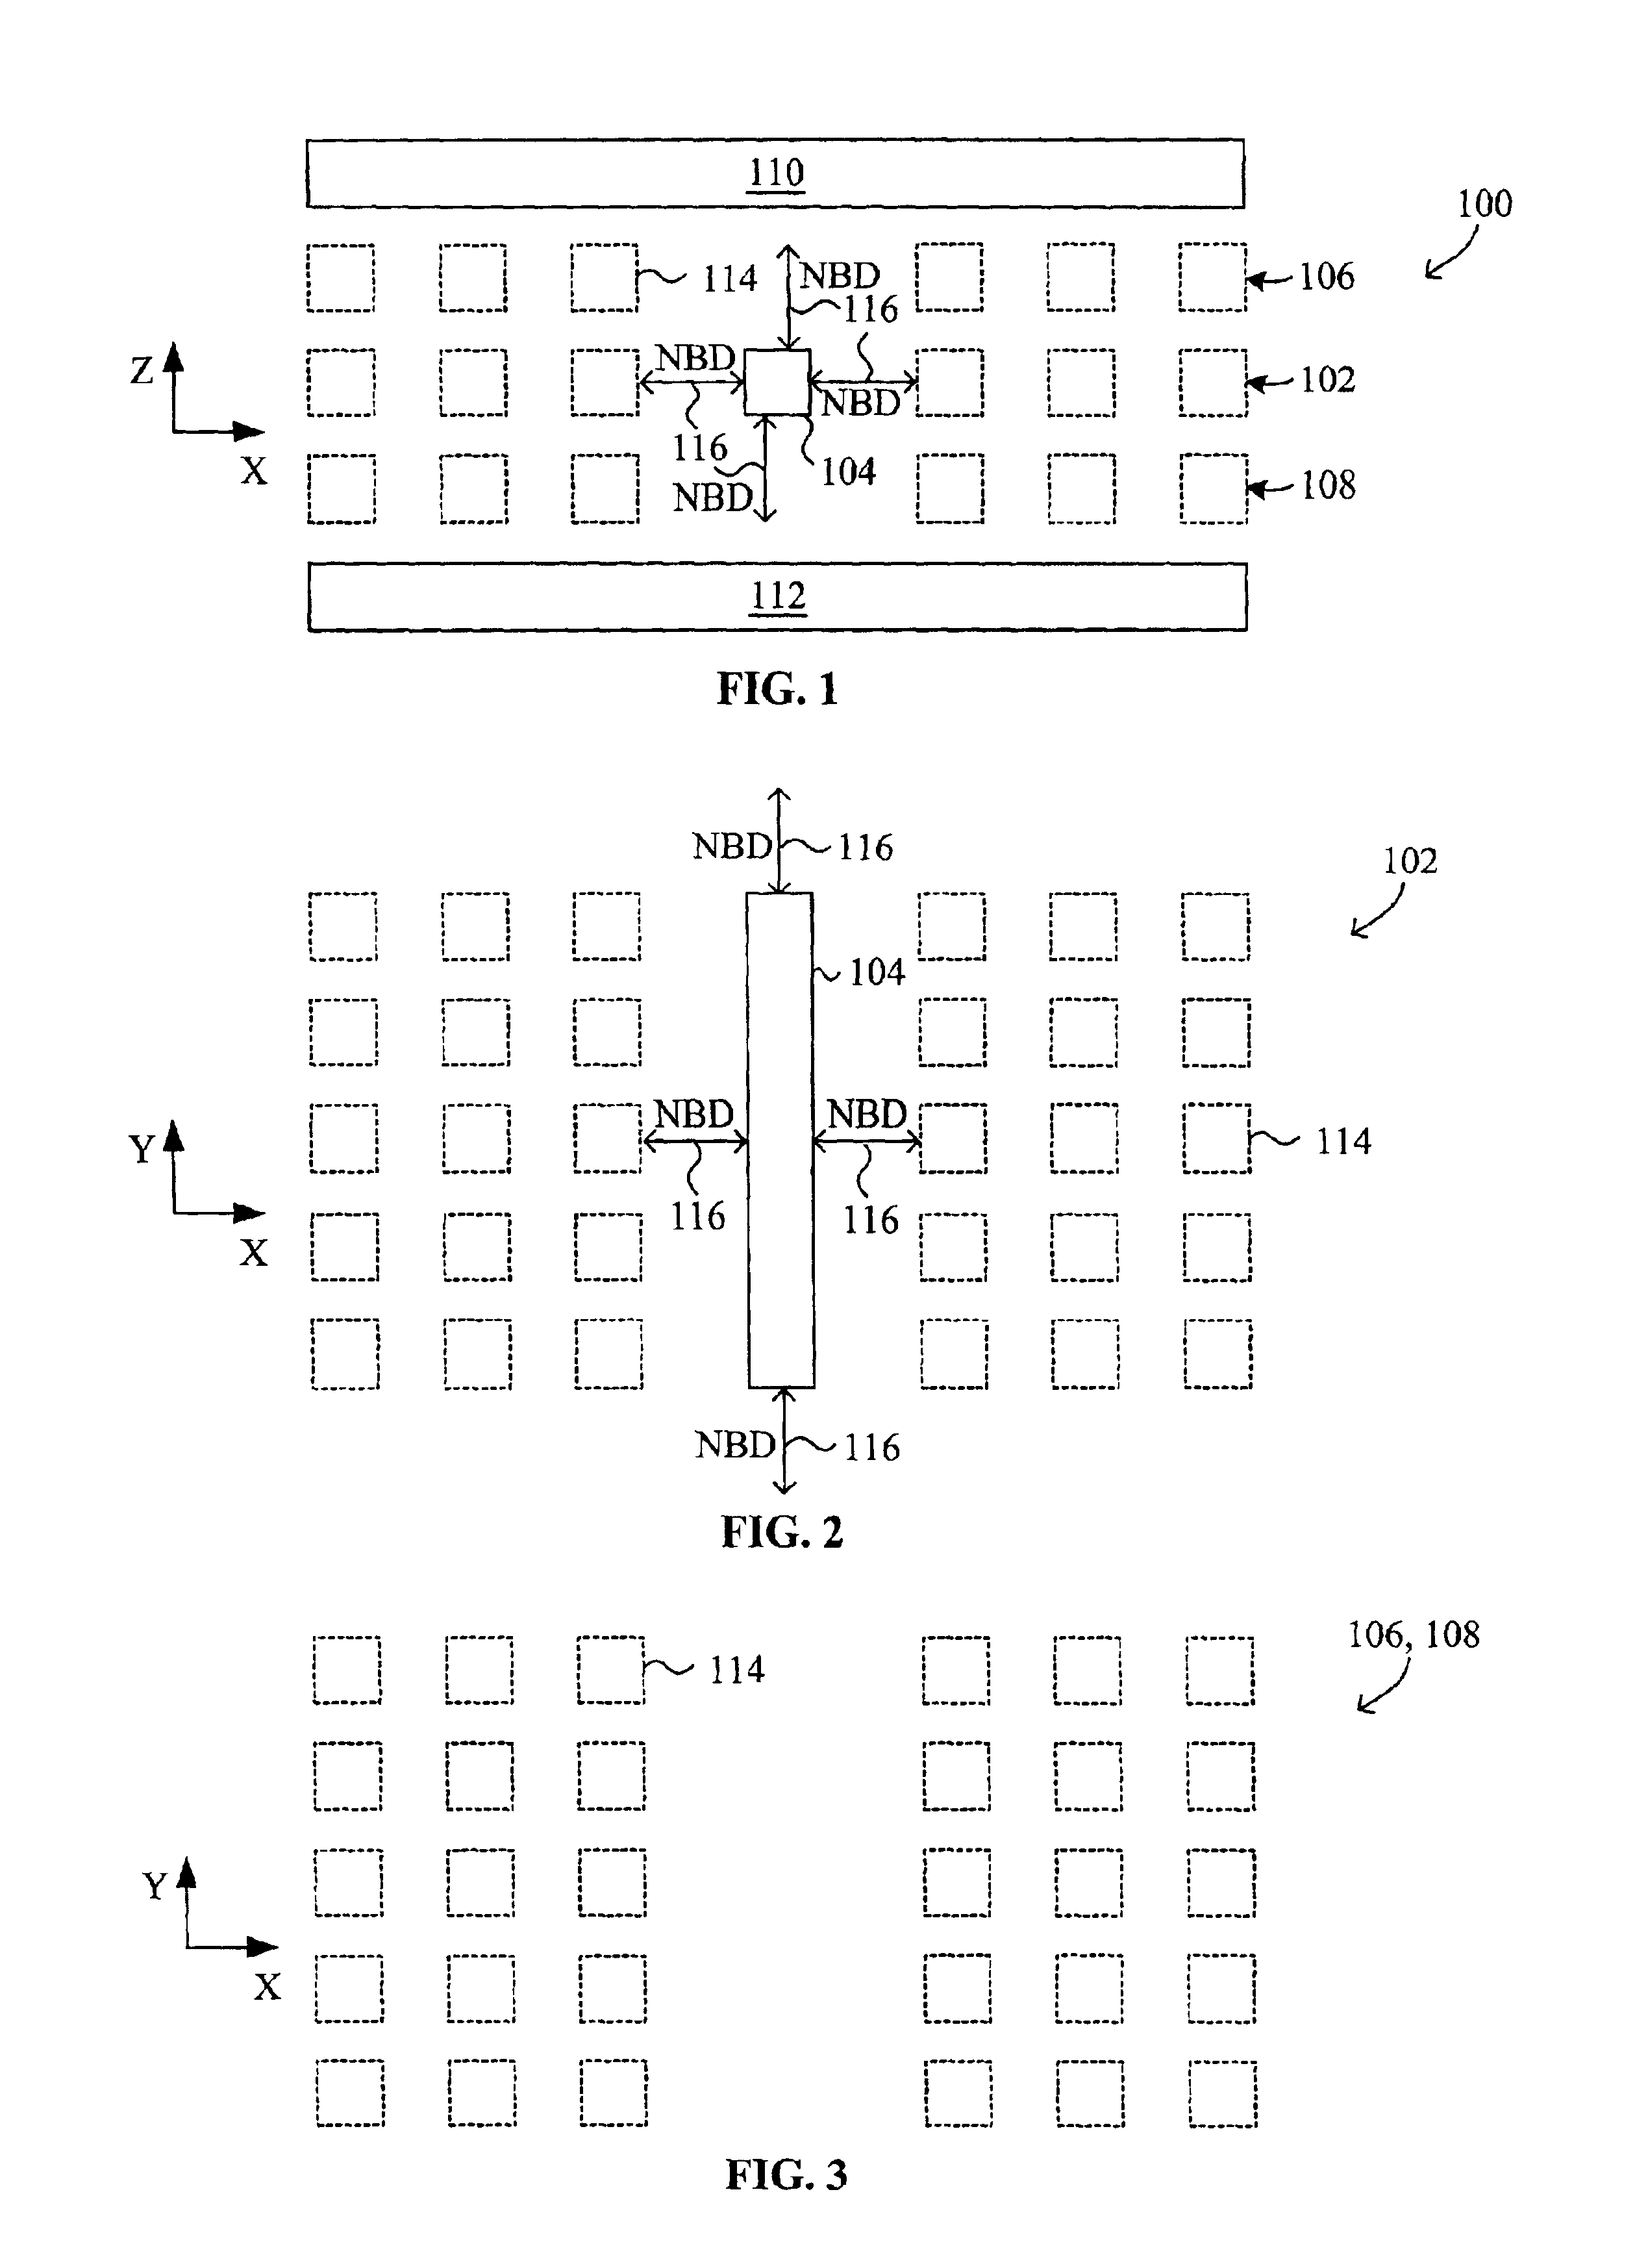 System and method for limiting increase in capacitance due to dummy metal fills utilized for improving planar profile uniformity